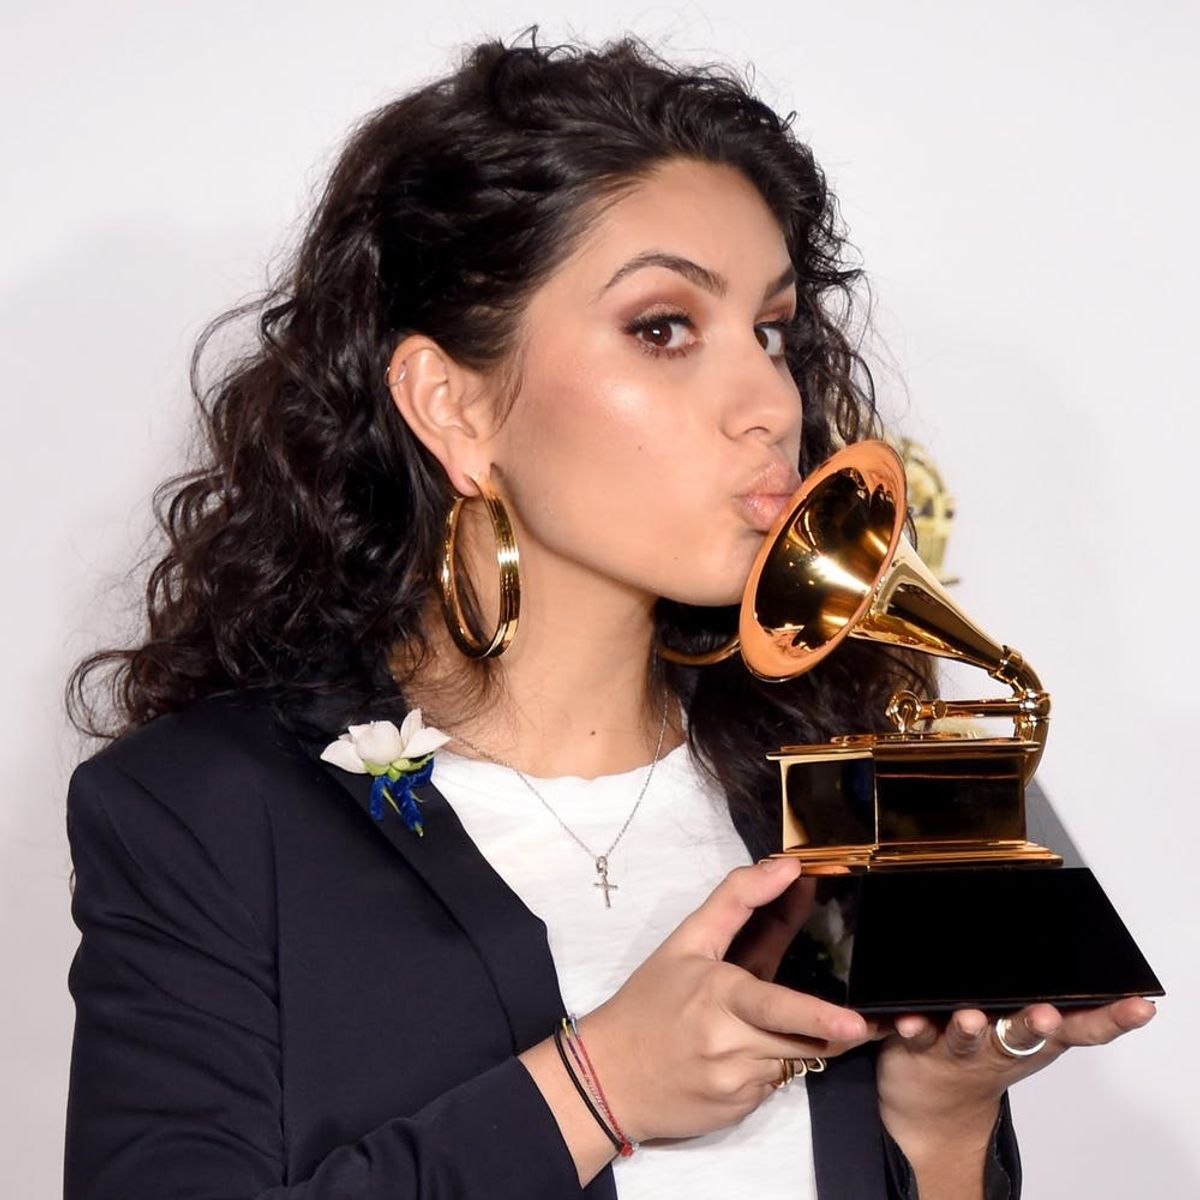 Alessia Cara Has a Message for People Criticizing Her Best New Artist Grammy Win